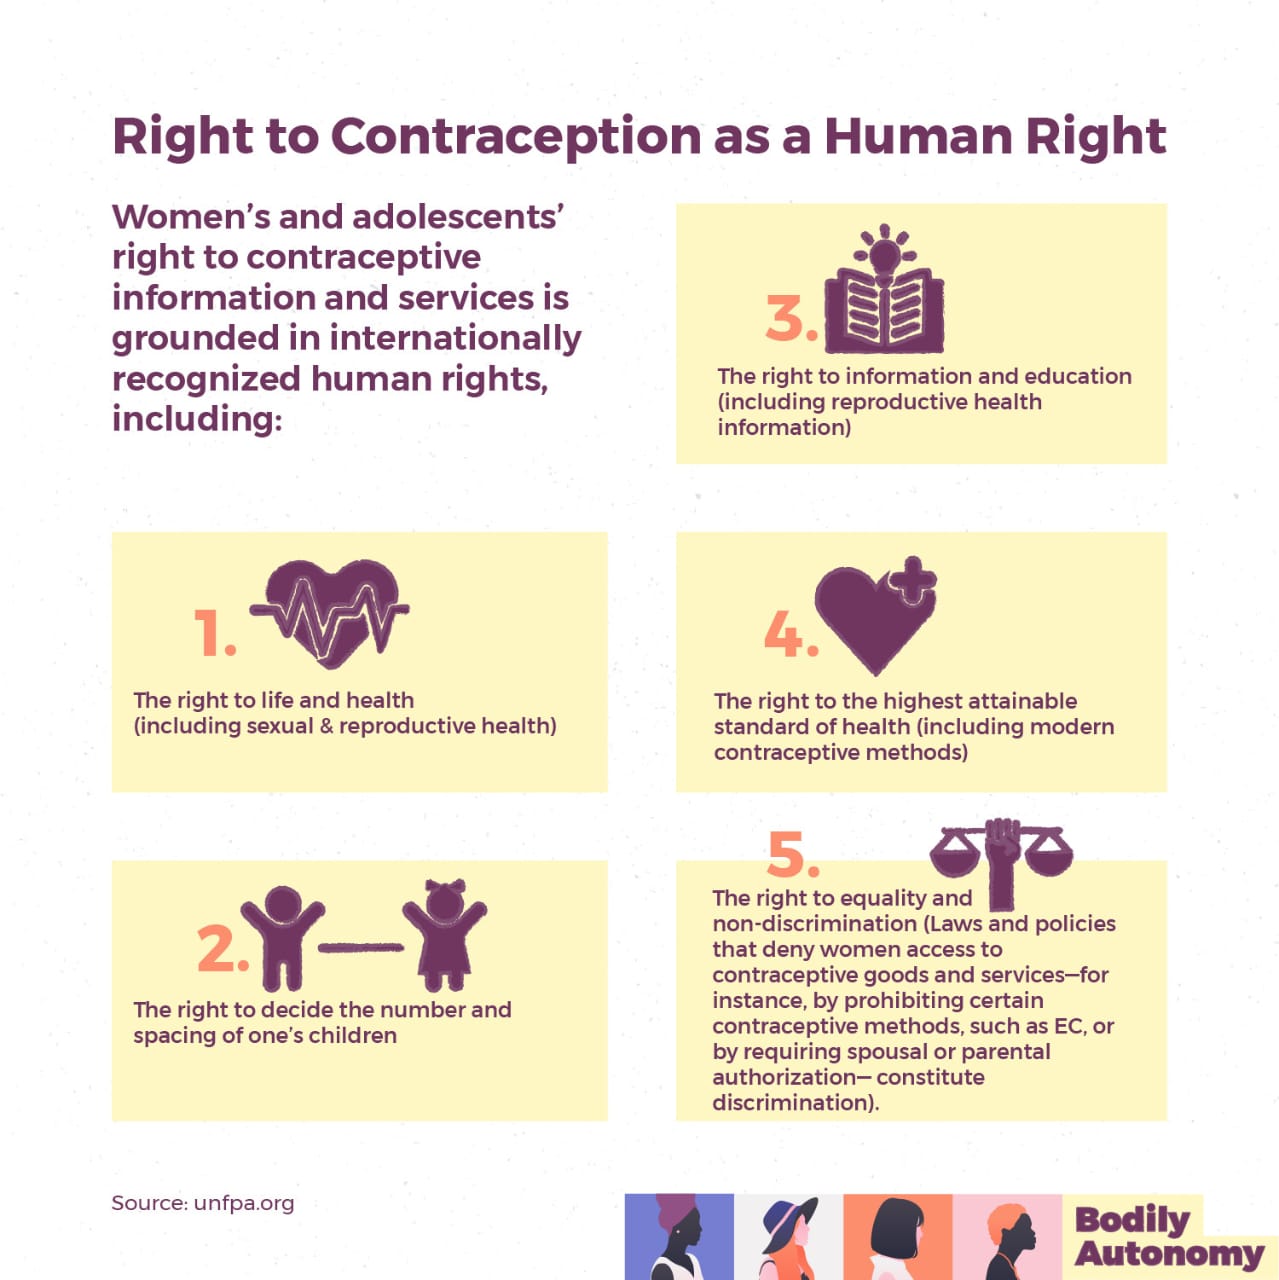 Infographic indicating the right to contraception as a human right.